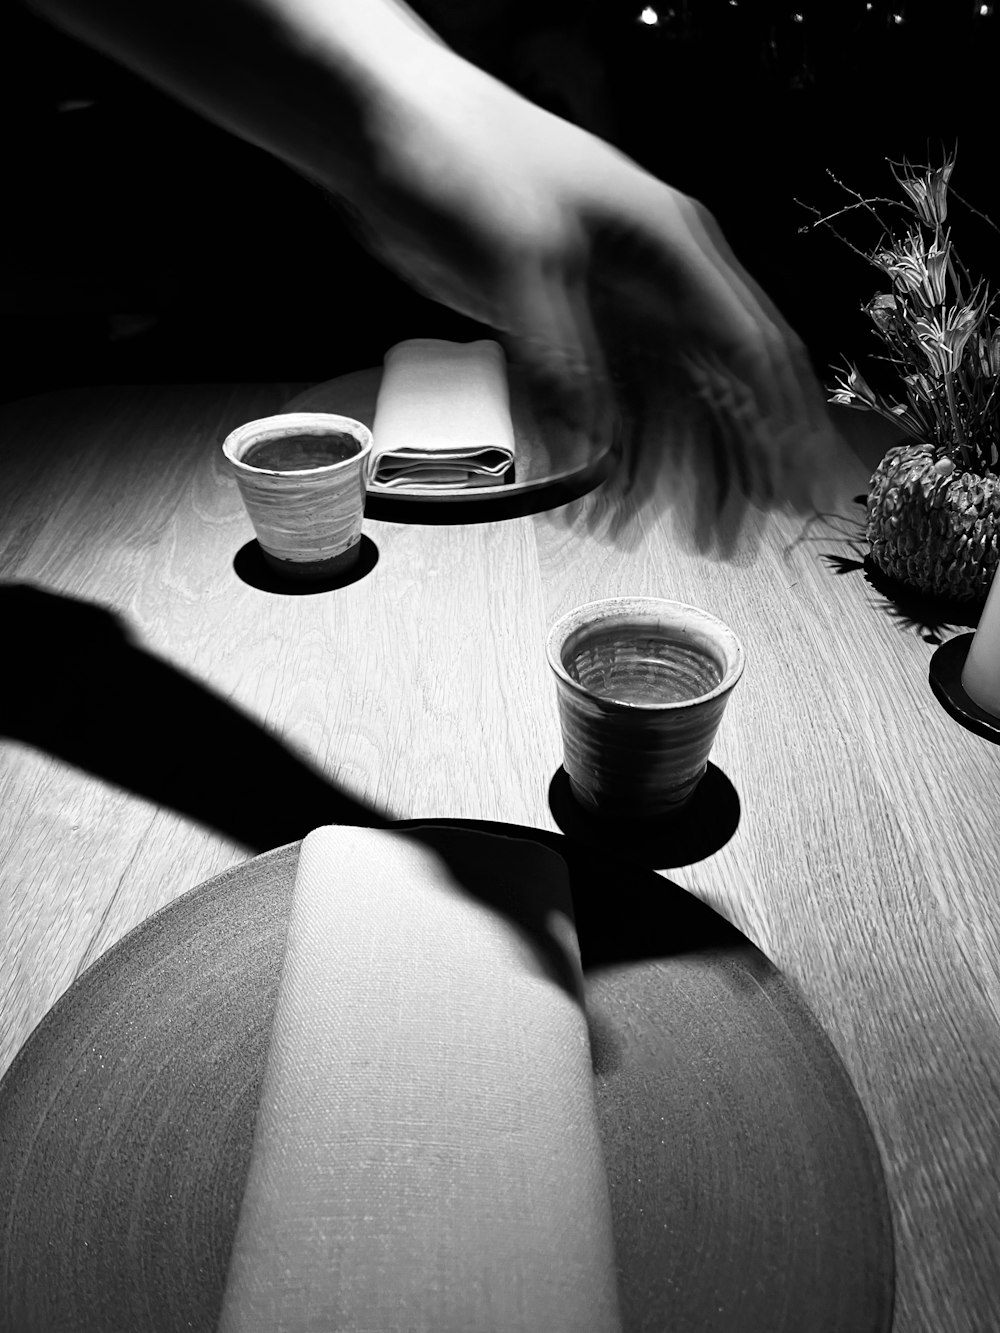 a person reaching for a cup on a table